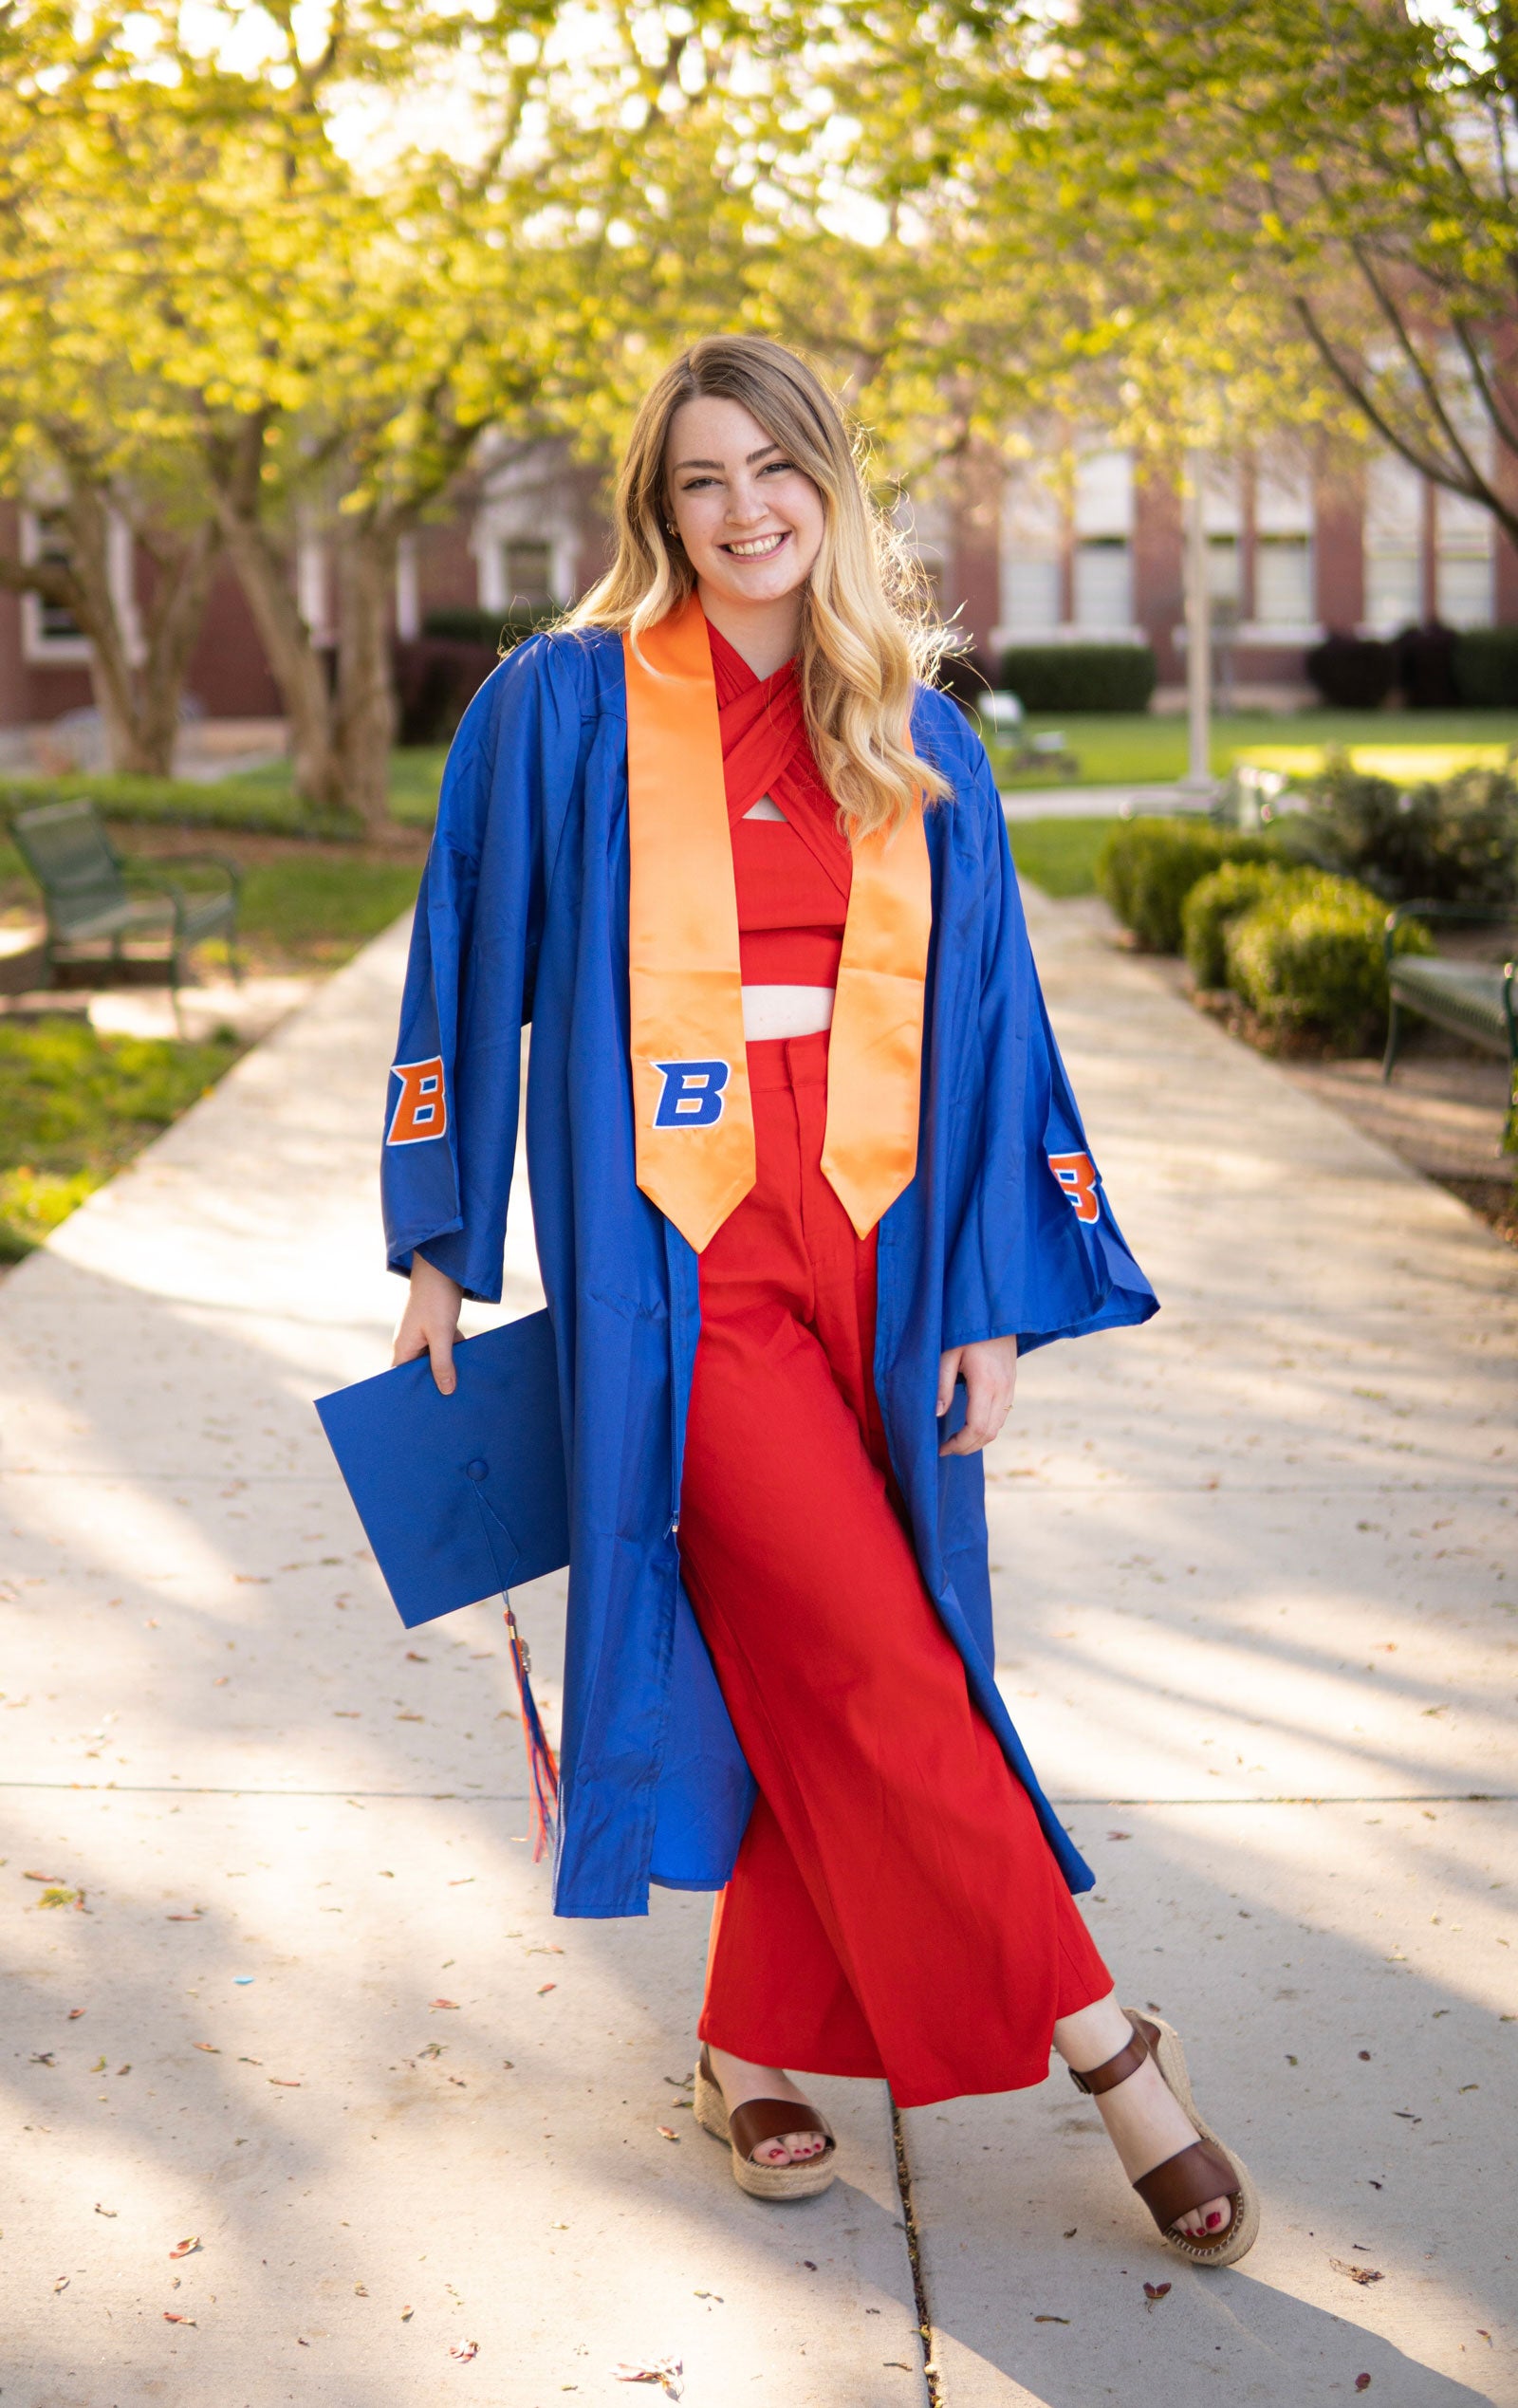 Grace Hall, a 2022 Fulbright scholar and Boise State Top Ten Scholar